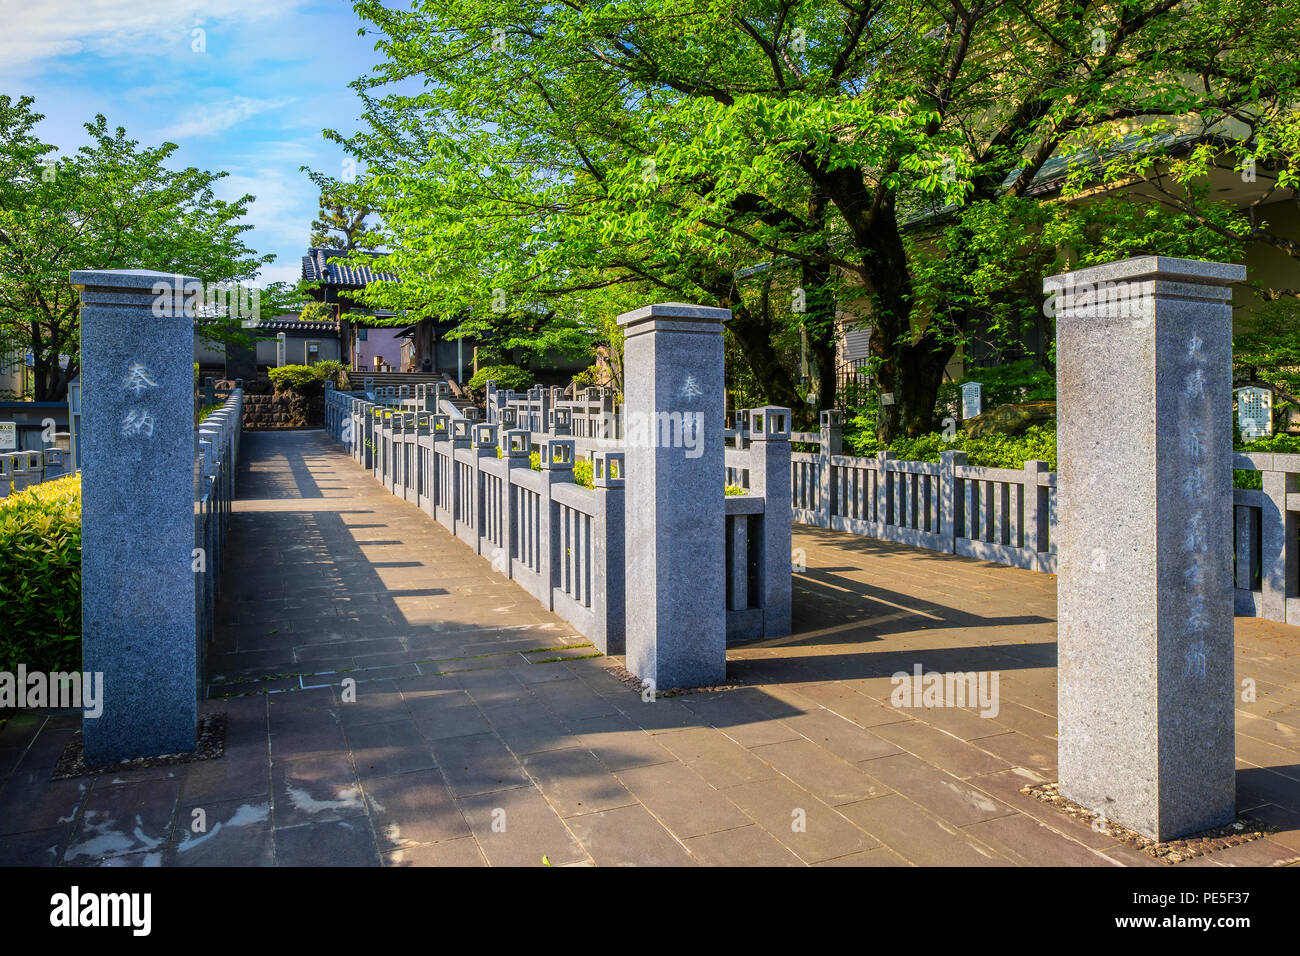 TOKYO, JAPAN - APRIL 20 2018: The way to the grave of 47 ronin, the 47 loyal masterless samurai, one of the most popular Japanese historical epic lege Stock Photo